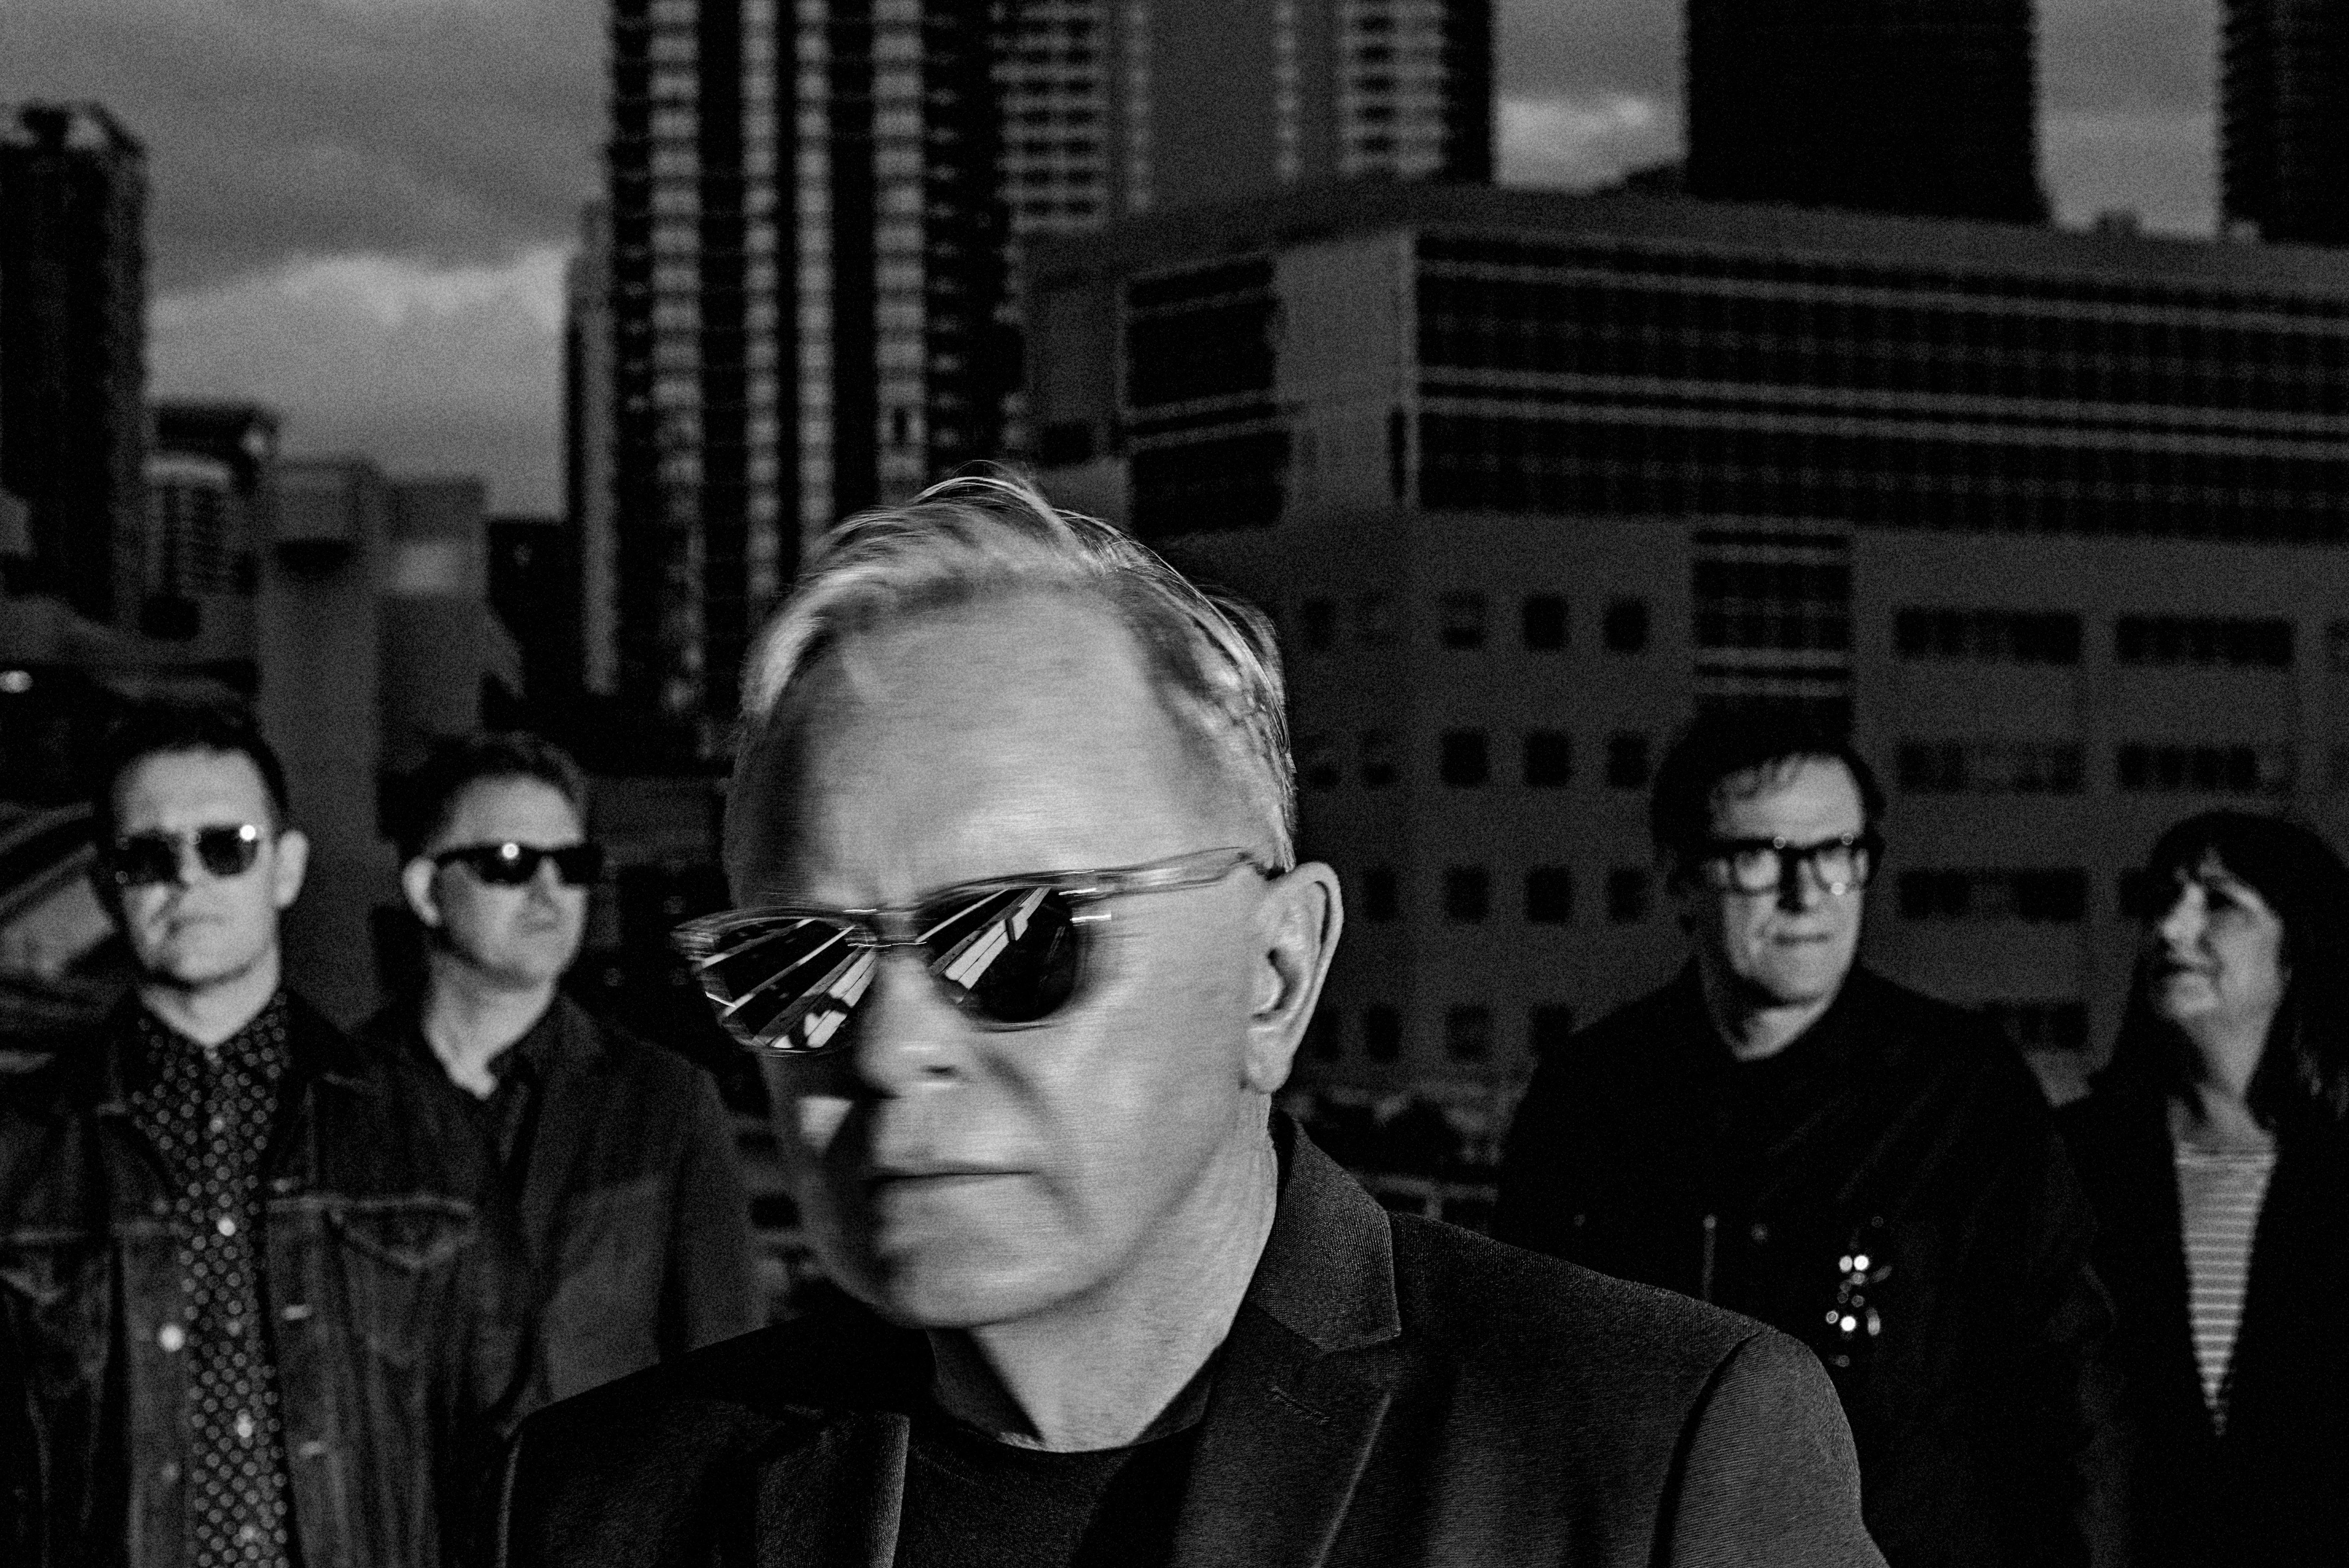 The members of New Order, standing on a building's roof, face the camera